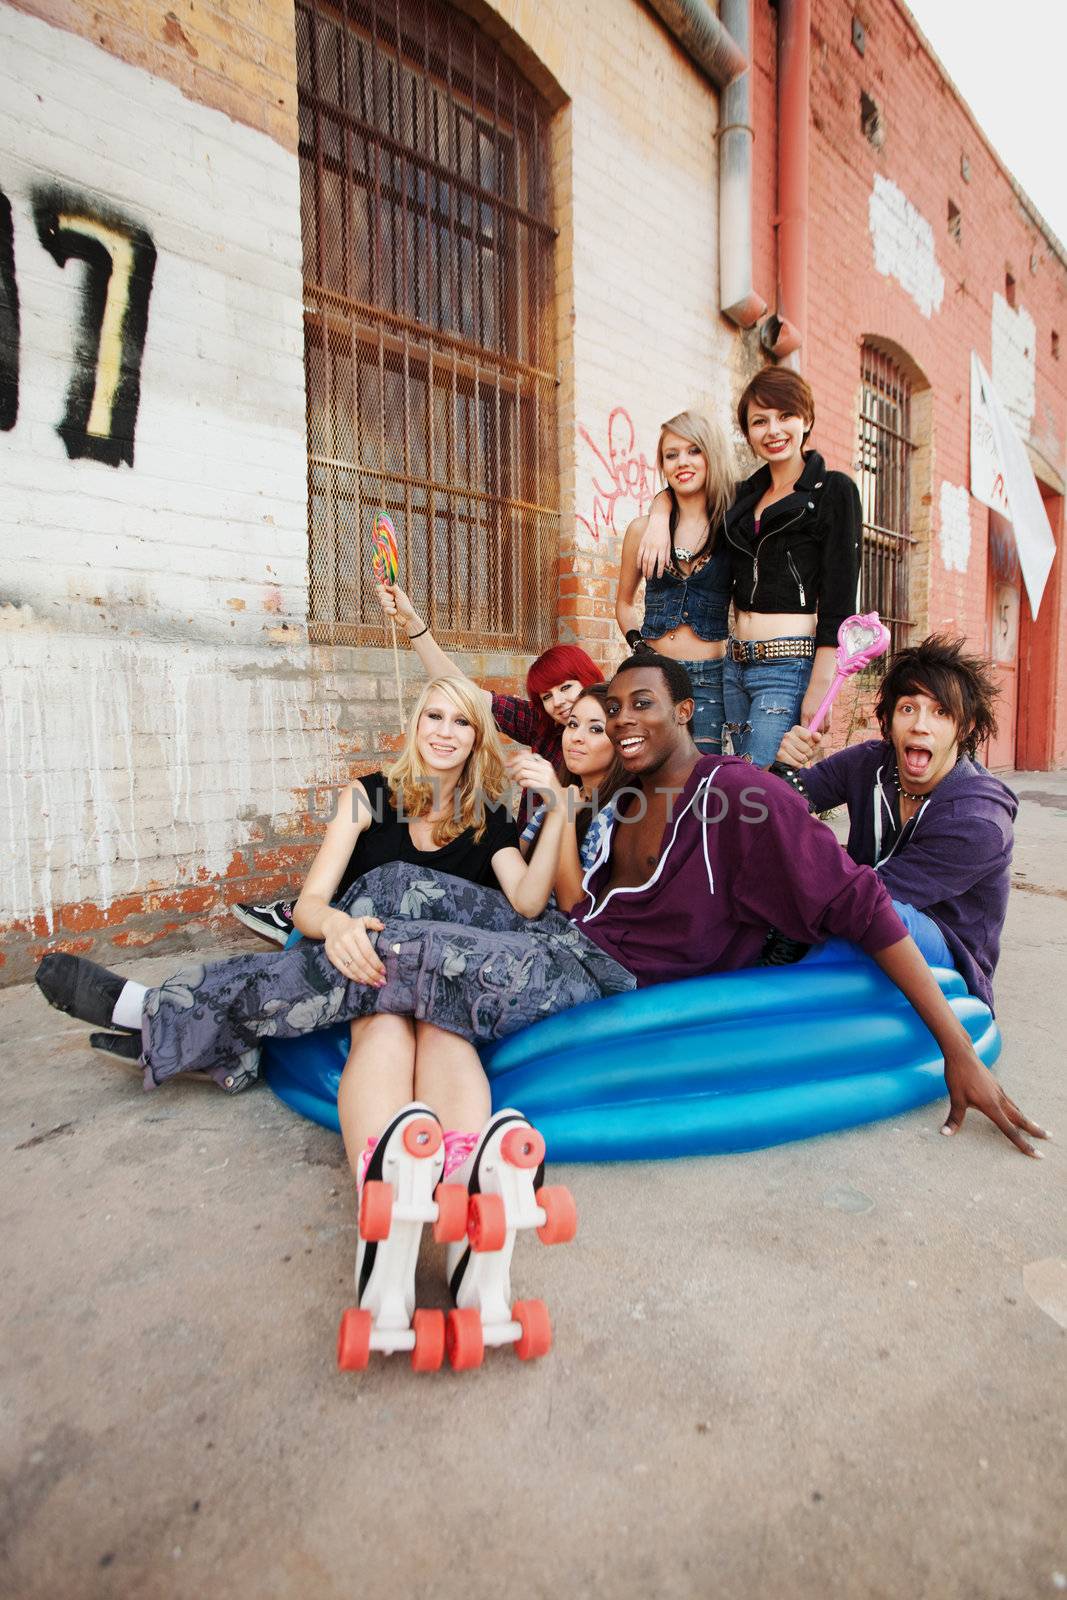 Fun loving group of teen punks sit in an inflatable pool by Creatista